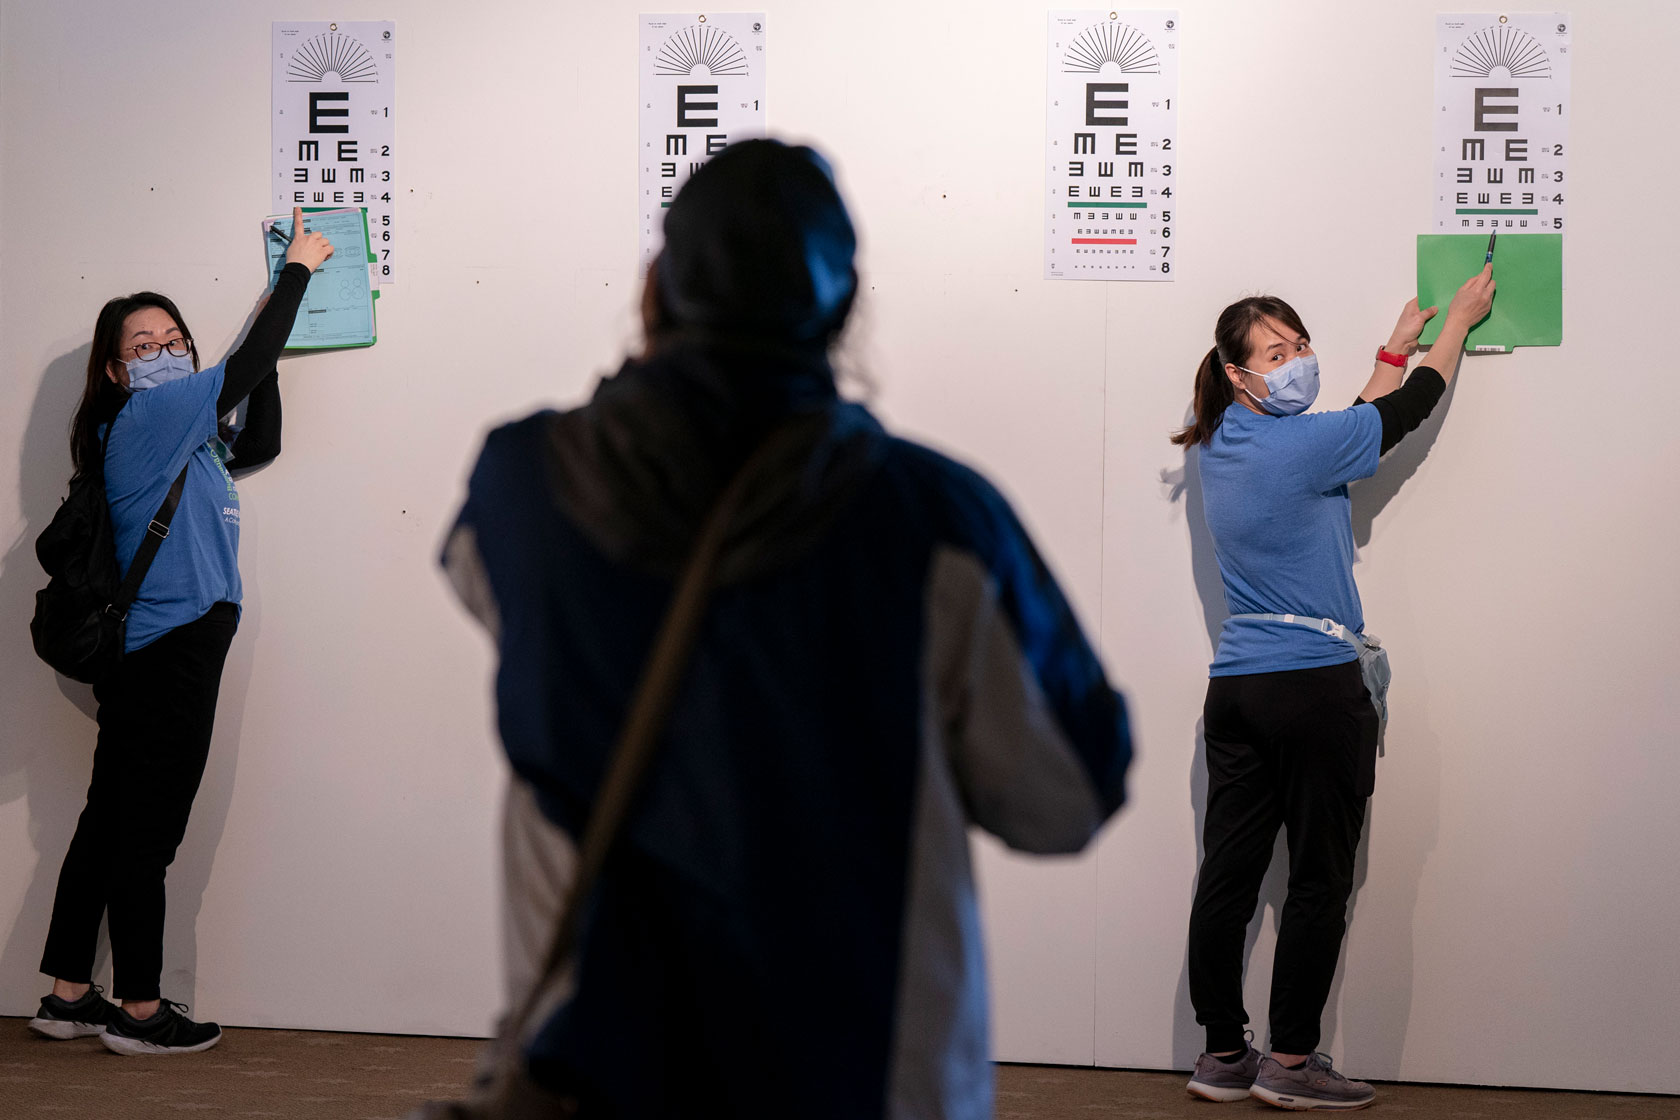 A person stands with their back to the camera in front of two people each pointing to an eye chart.